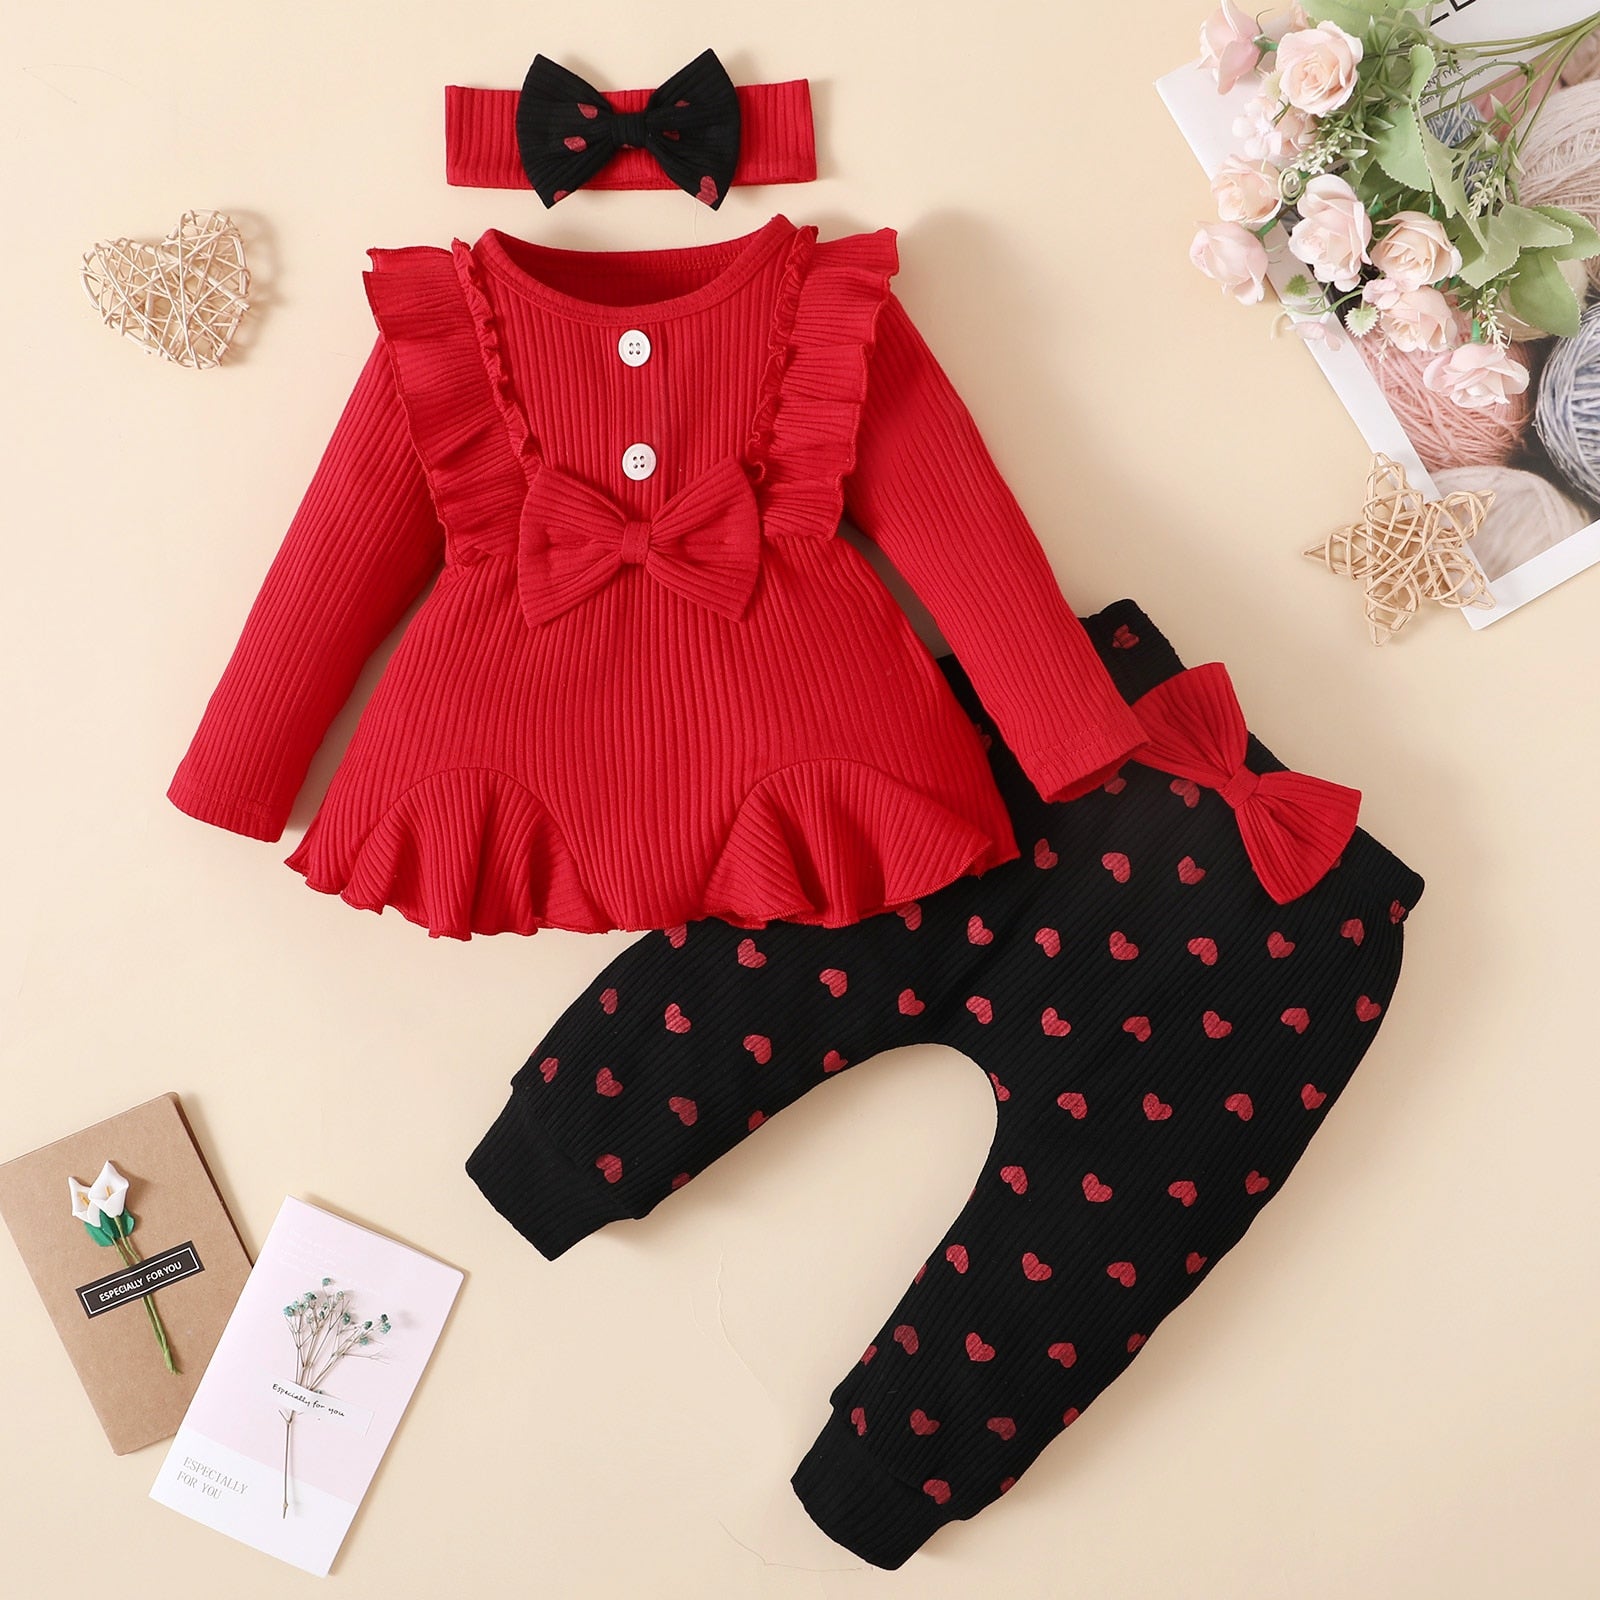 3-Piece Bowknot Girl Outfit in Red